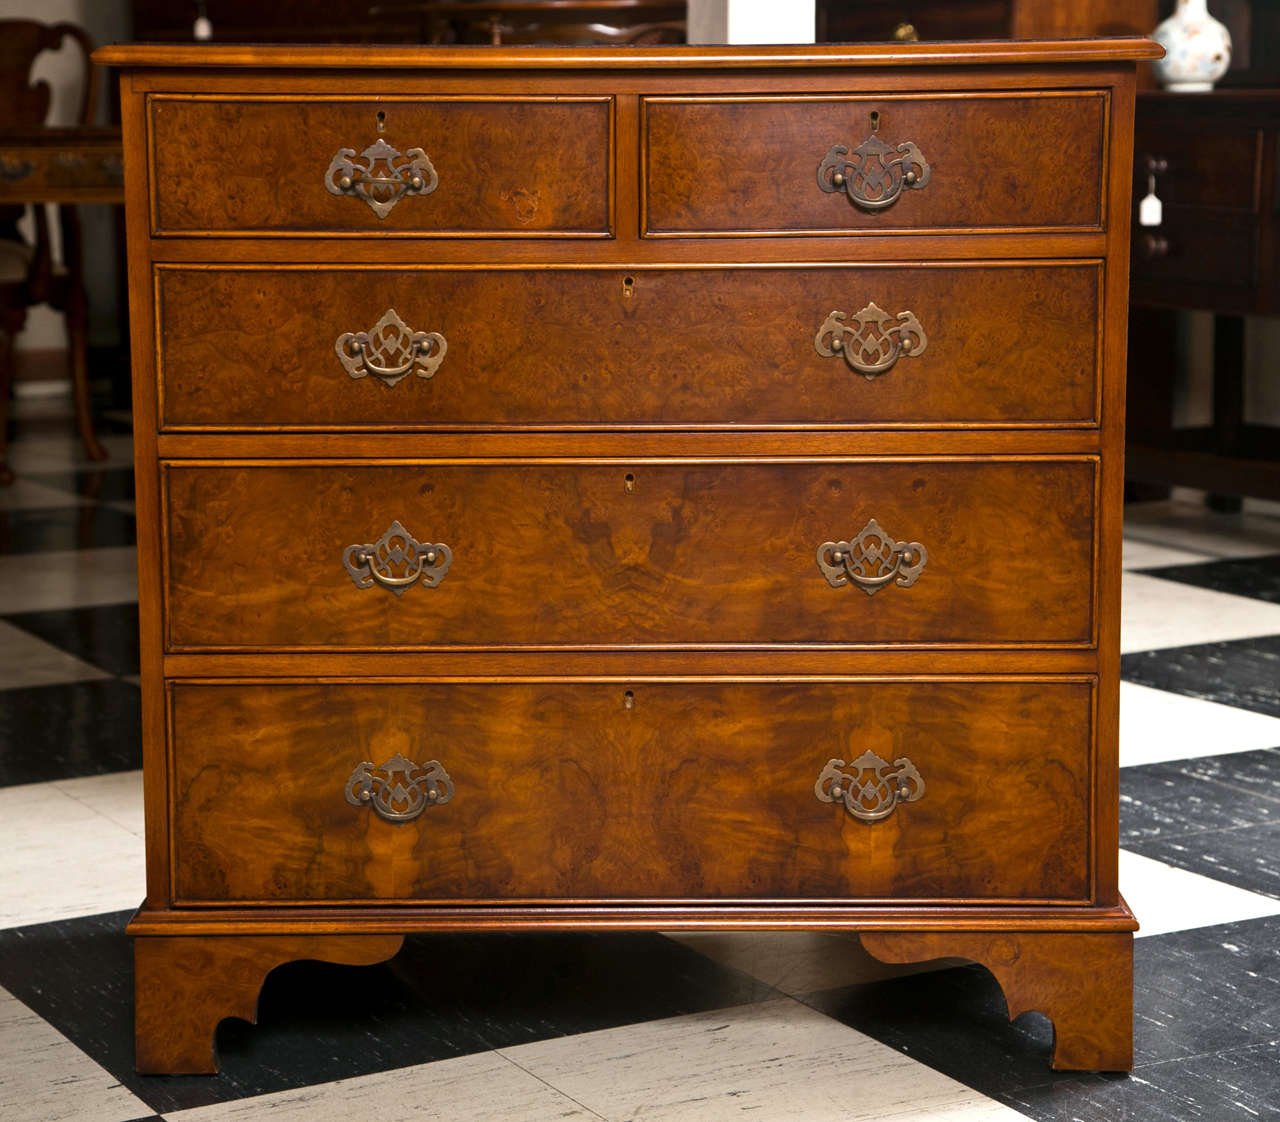 Beautiful burled walnut encompasses the top and front of this custom chest while a handsomely striated grained walnut covers the sides. Oak-lined drawers speak of the quality and attention to detail in this chest, which is proportioned well for